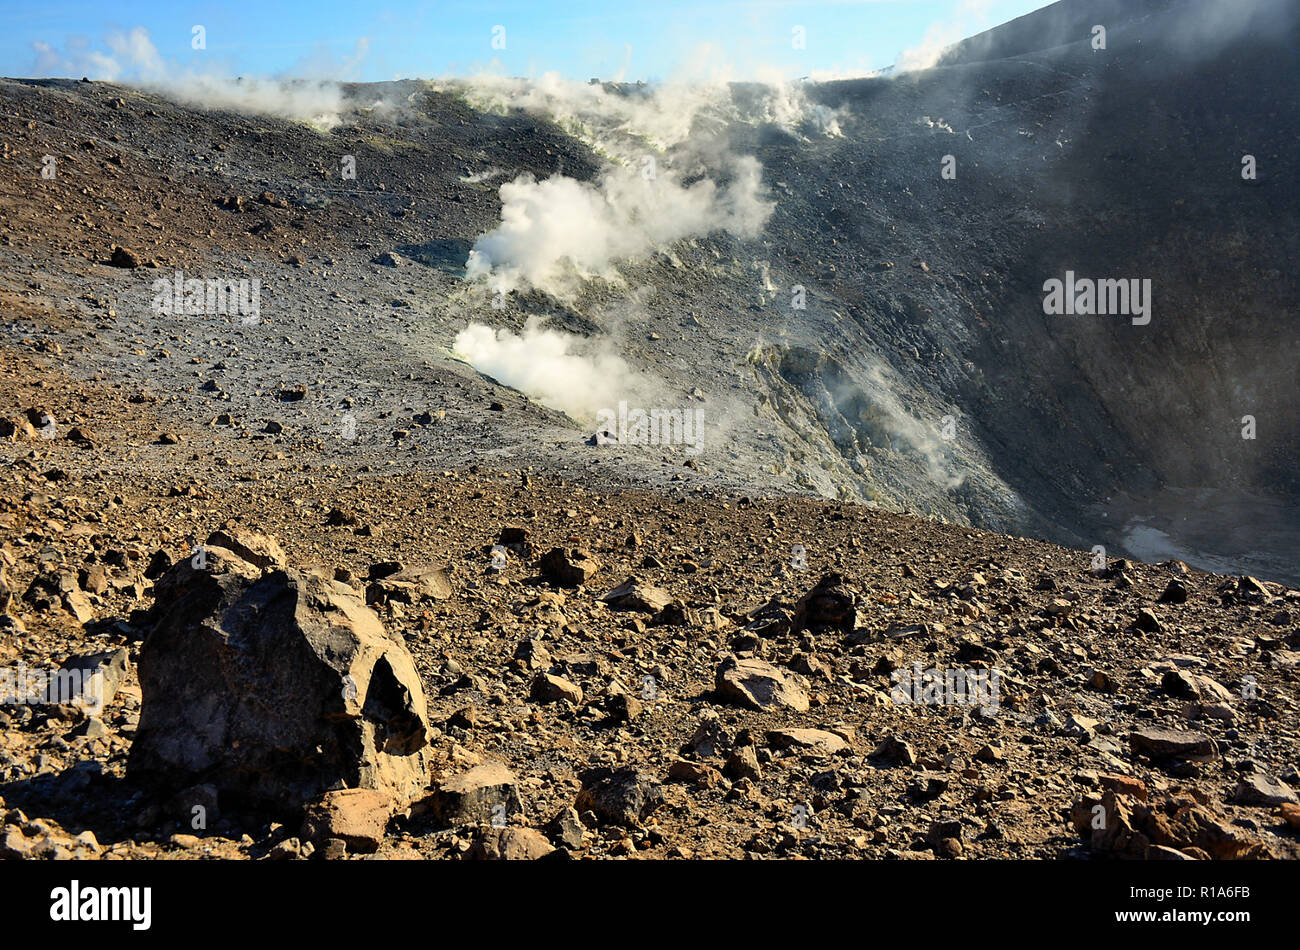 Aeolian Islands, Sicily, Italy. Island of Vulcano. View of Gran Cratere and Fumaroles. Stock Photo